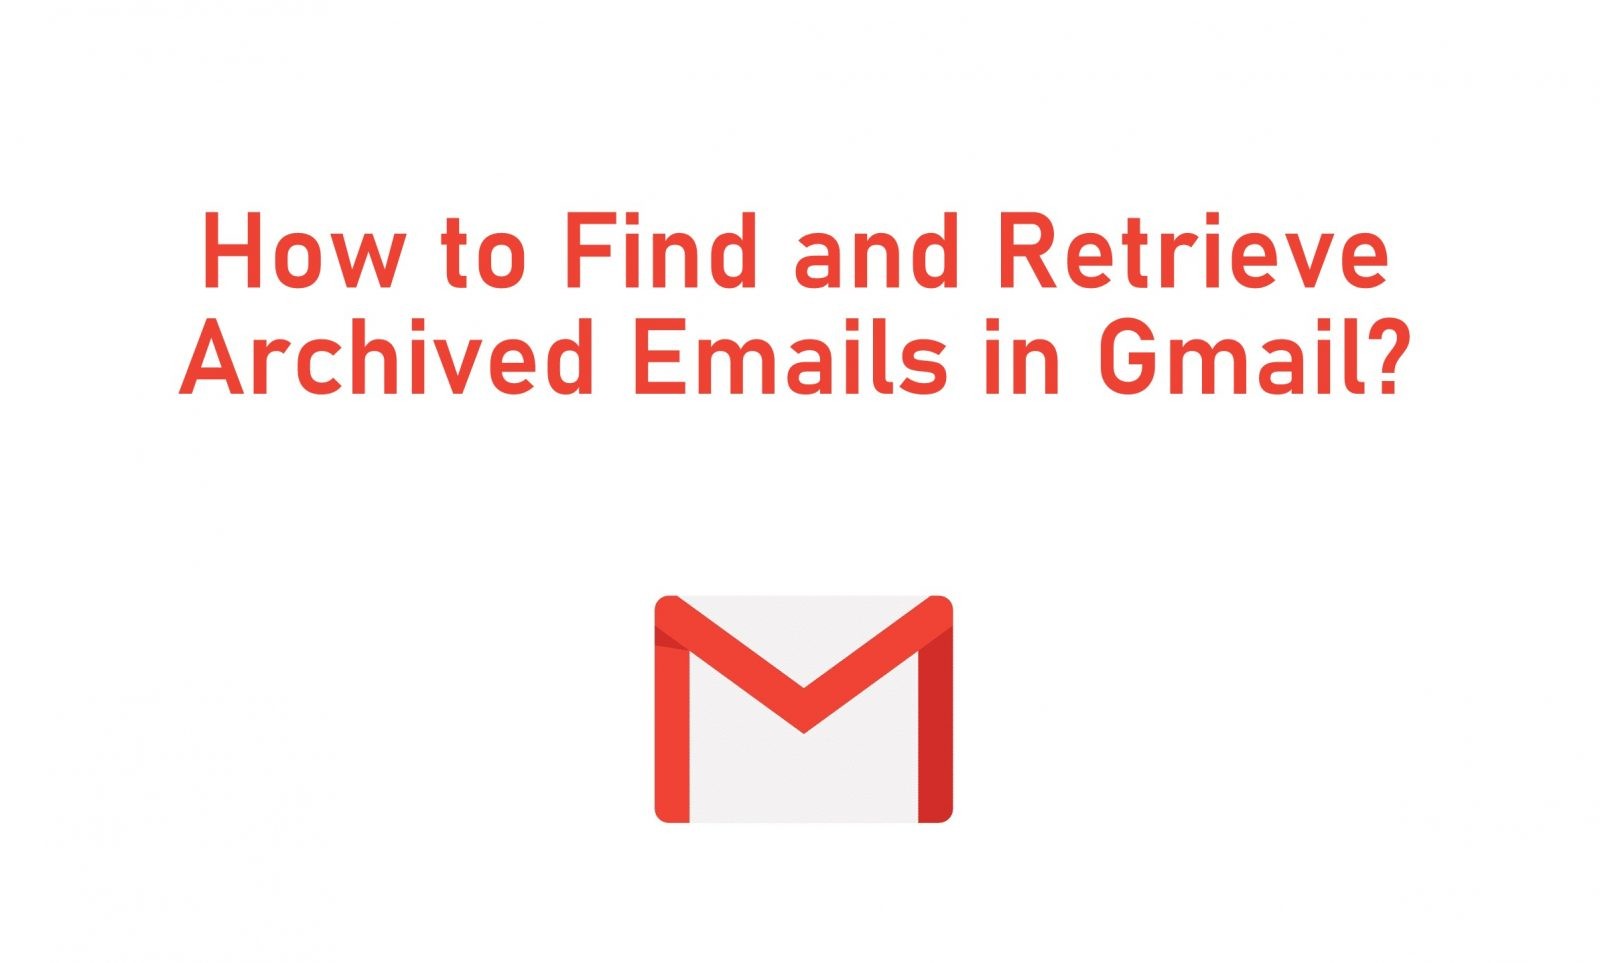 Find Archived Gmails